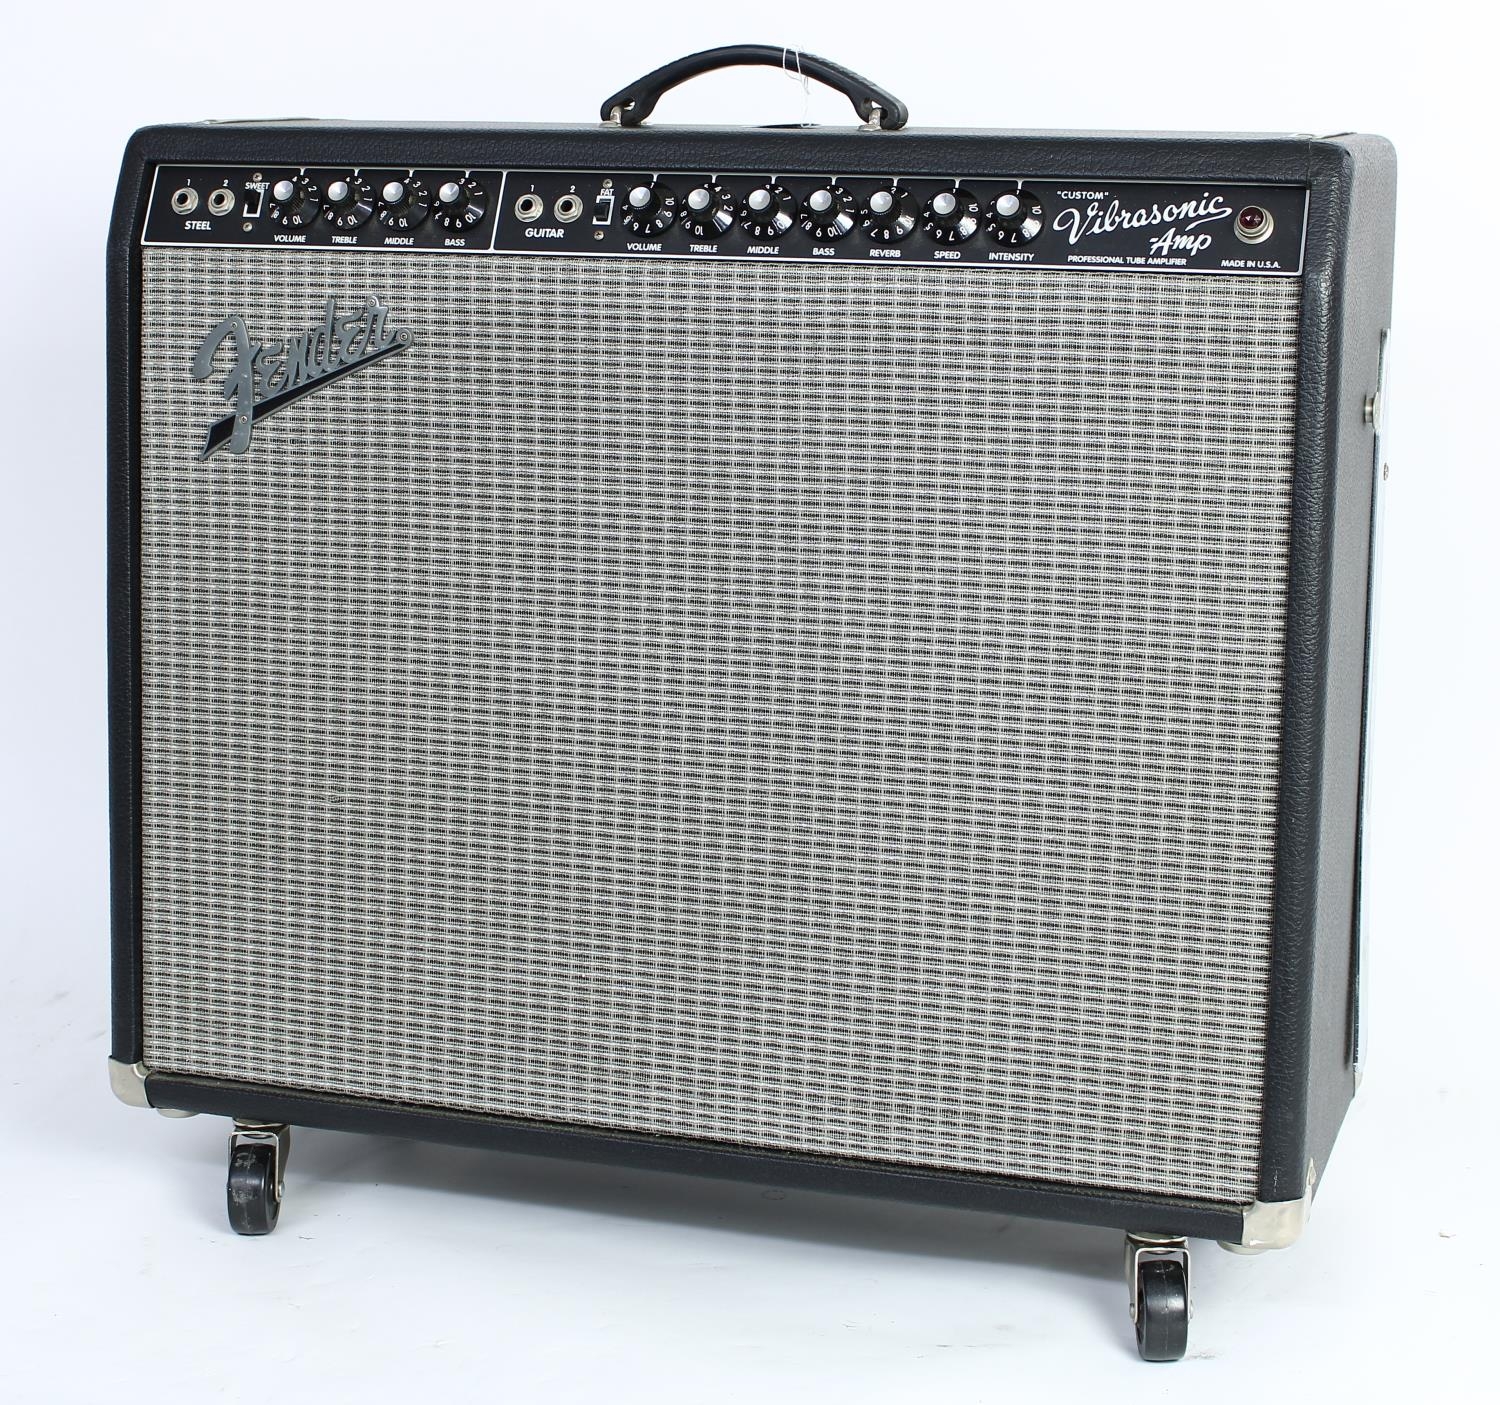 Fender Custom Vibrasonic-Amp guitar amplifier, made in USA, circa 1995, with foot switch and manual